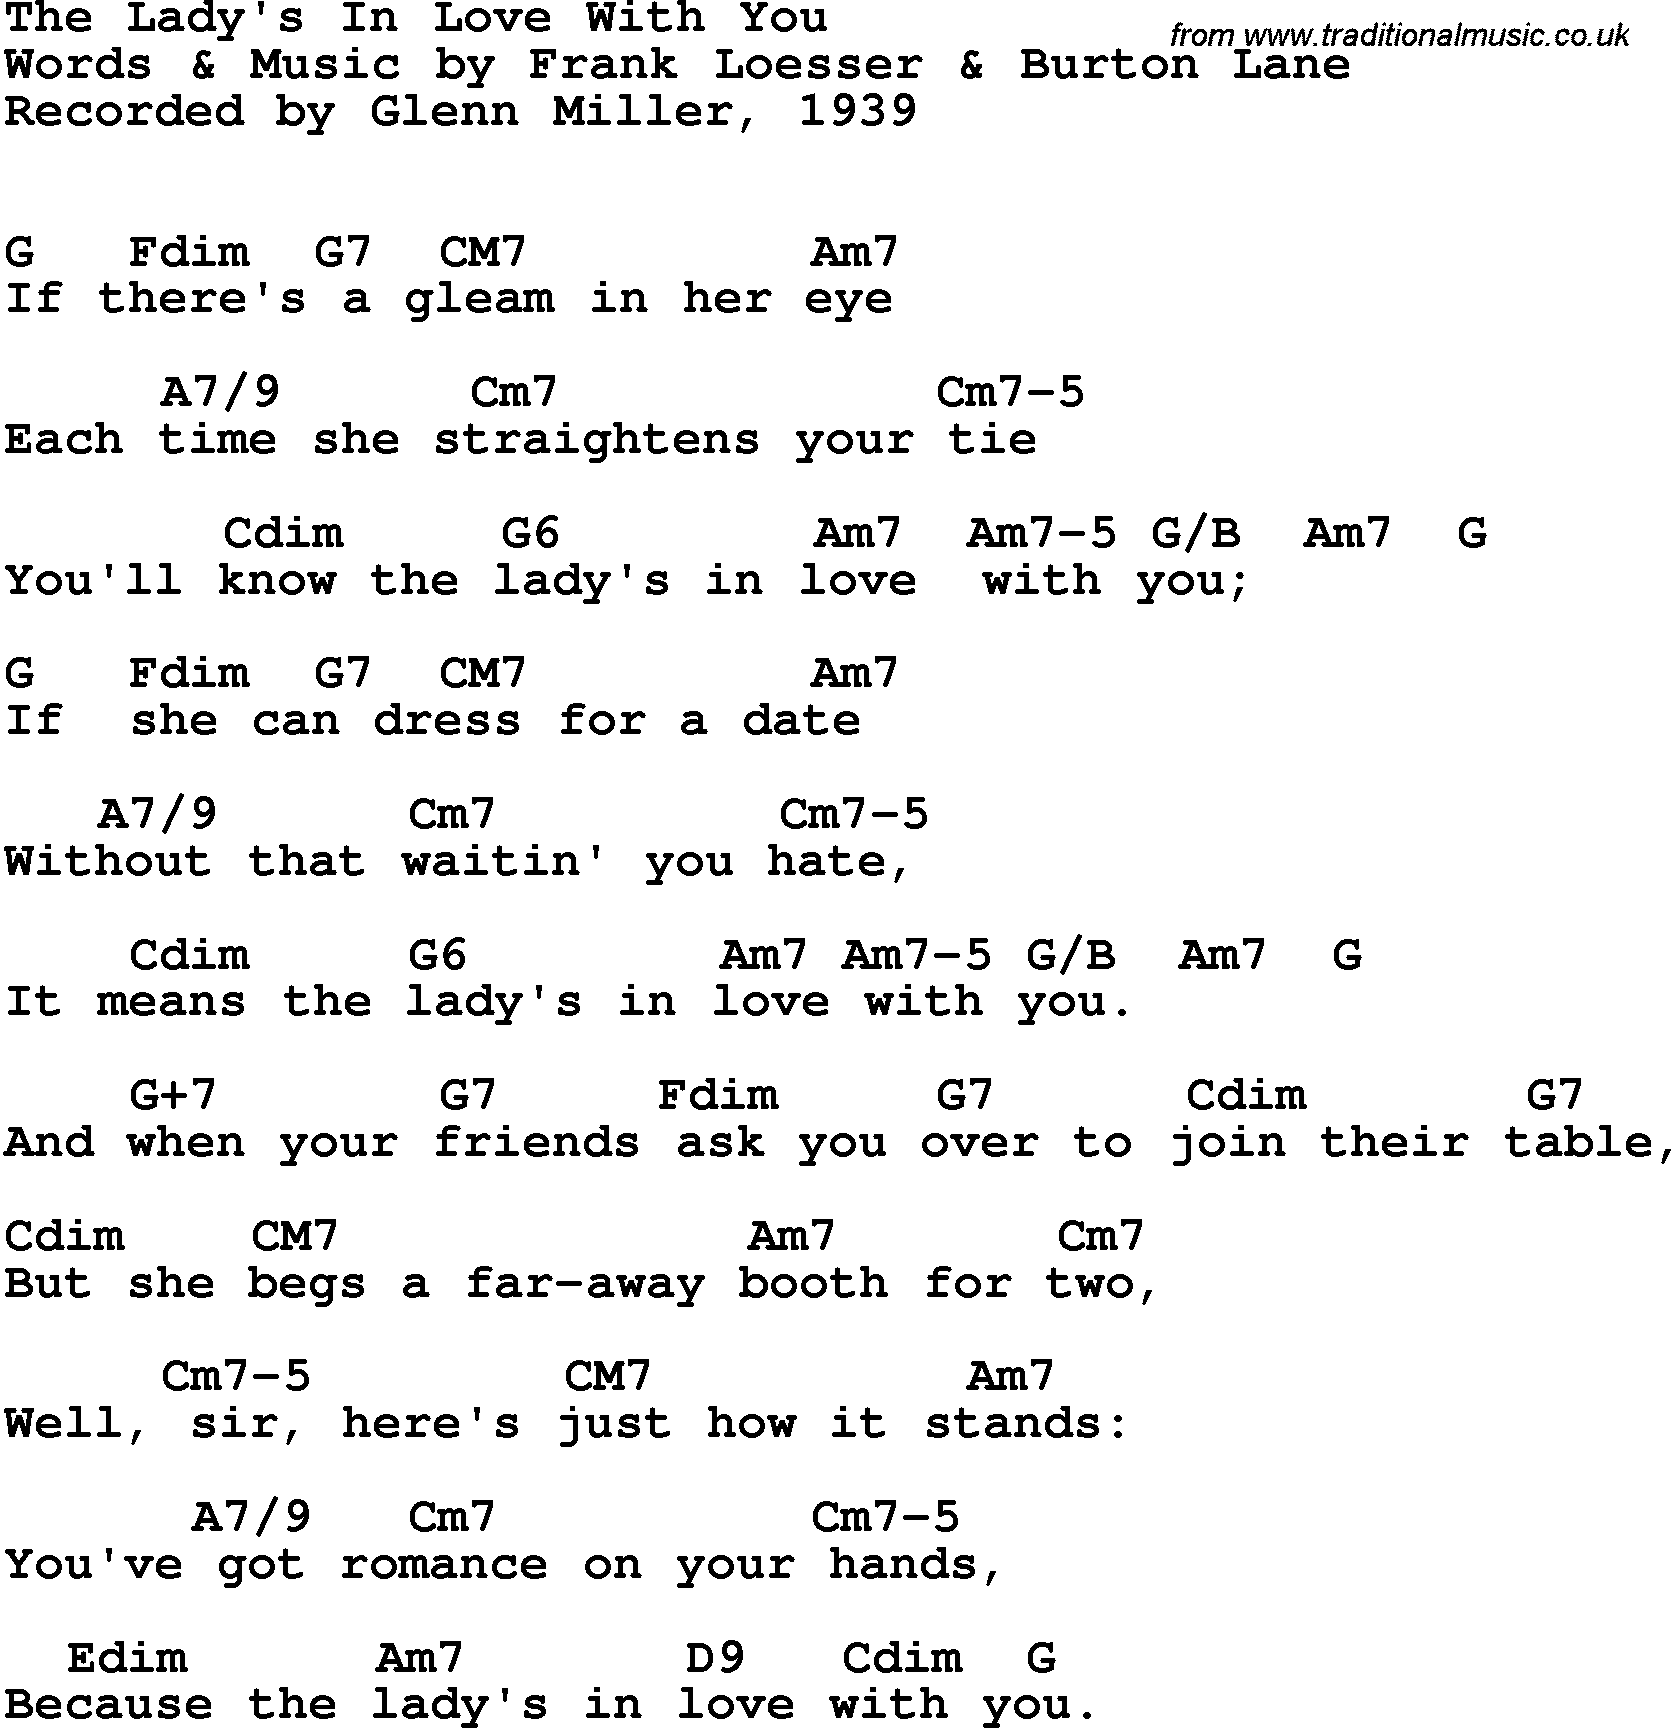 Song Lyrics with guitar chords for Lady's In Love With You, The - Glenn Miller, 1939